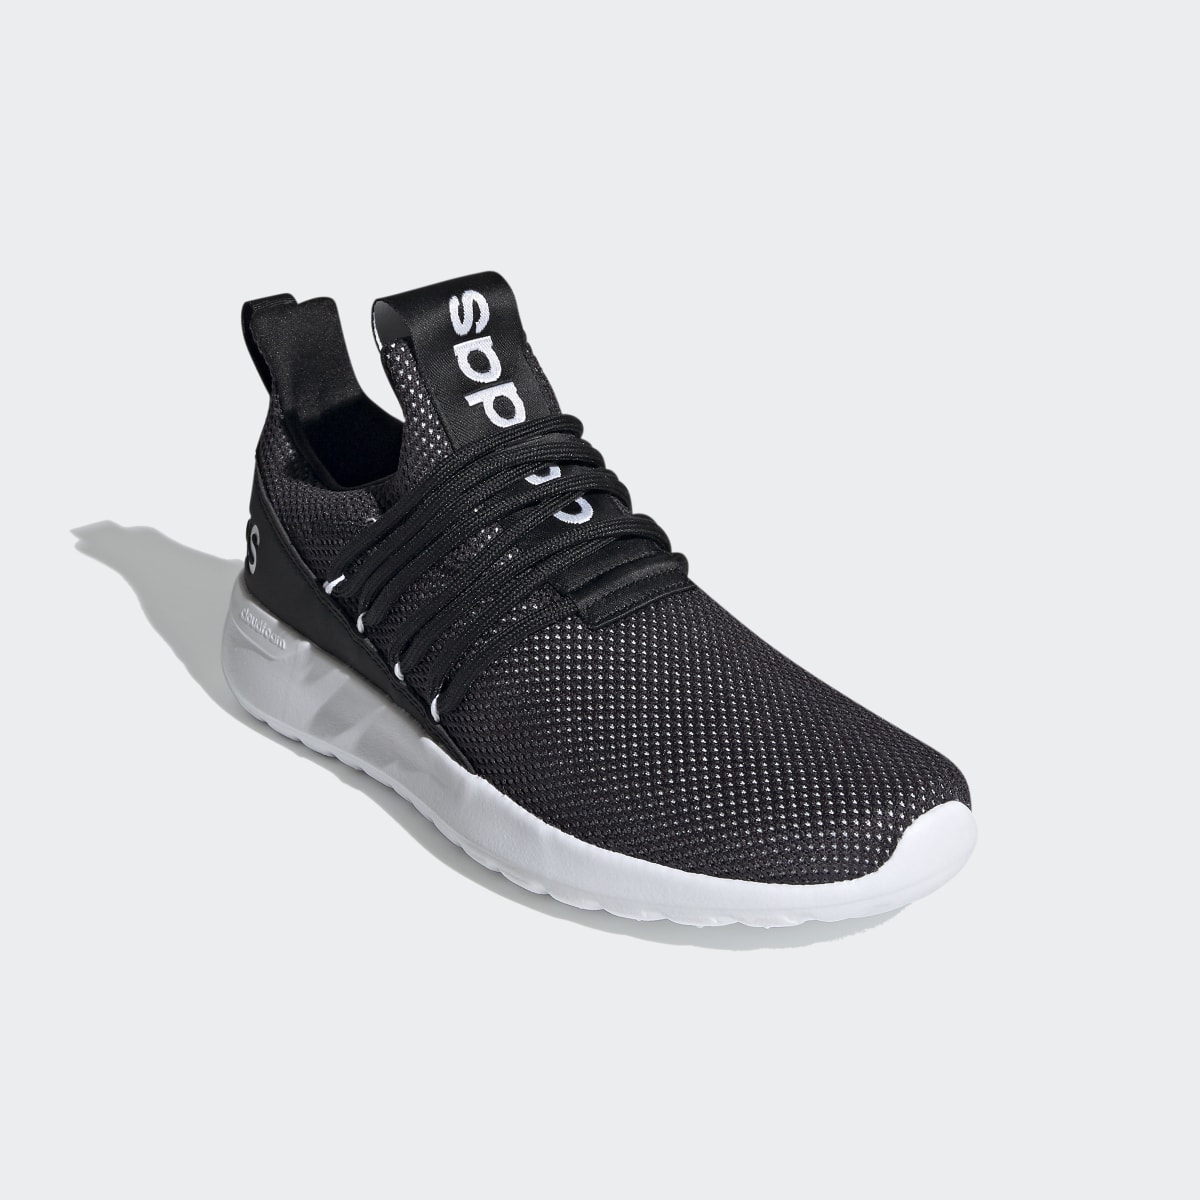 Adidas Lite Racer Adapt 3 Shoes. 5